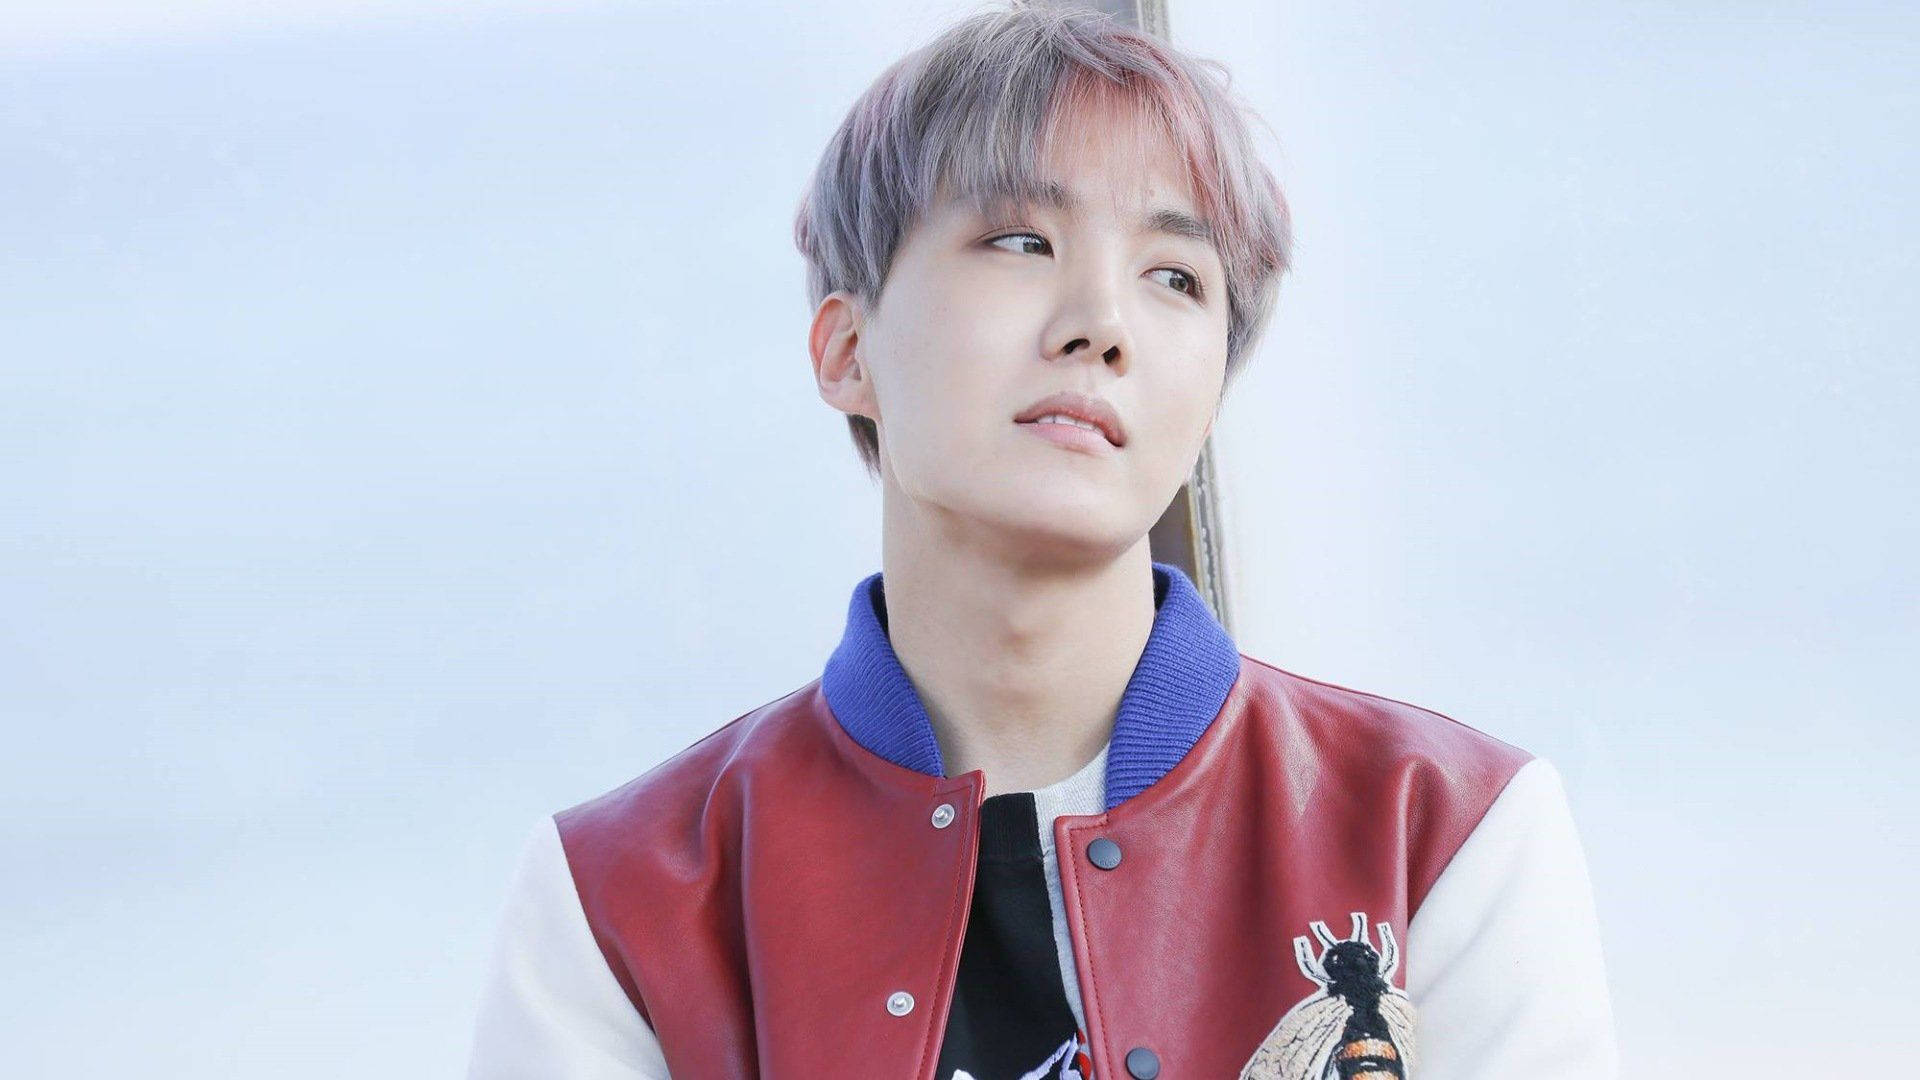 Cute Bts J-hope With Red And White Jacket Wallpaper